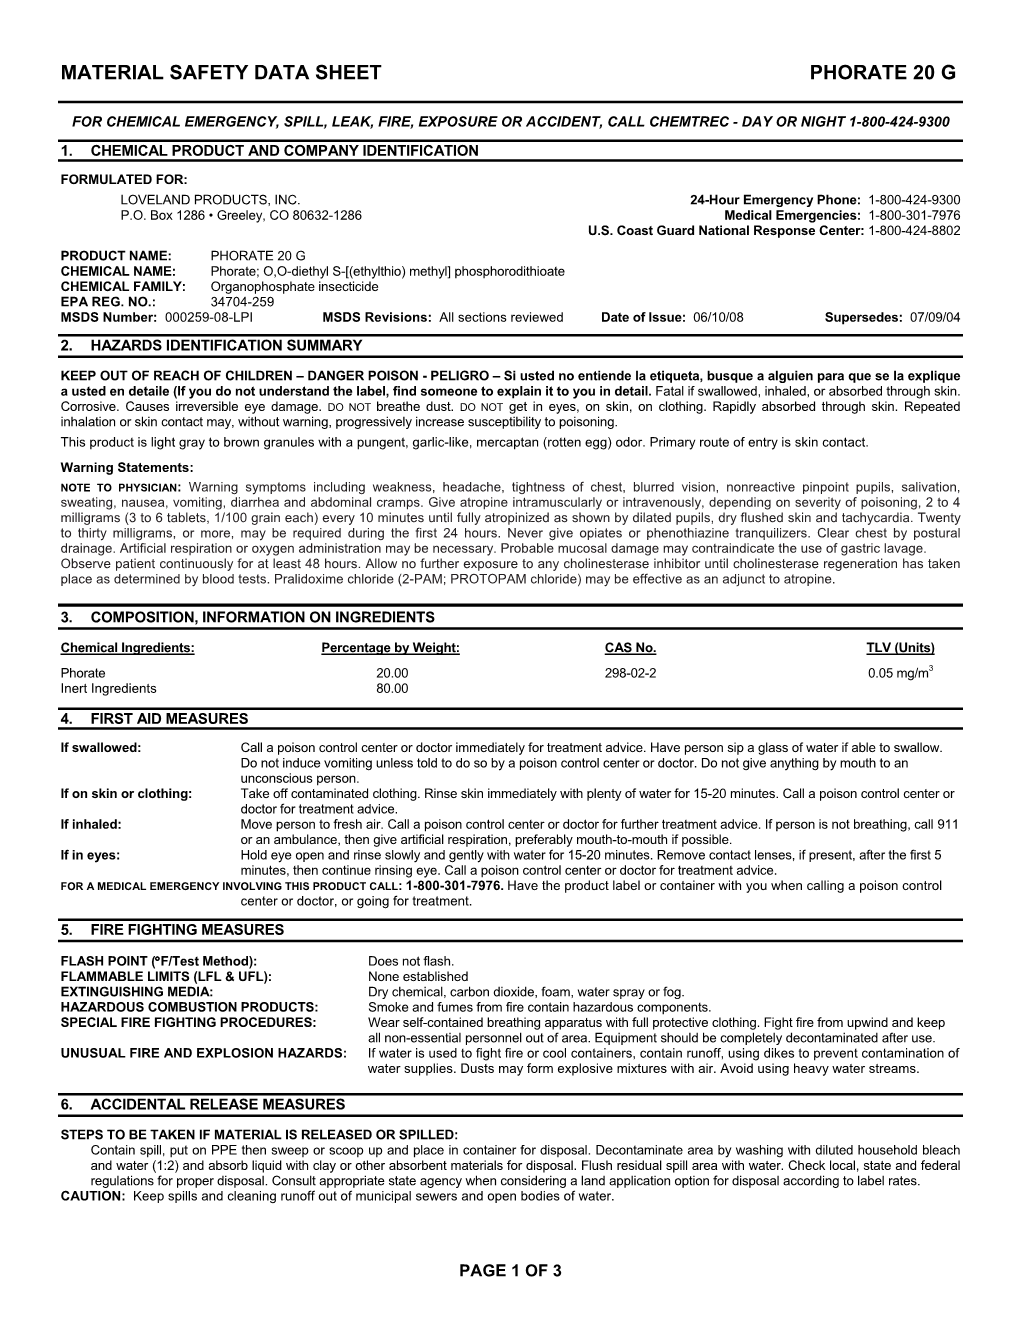 Material Safety Data Sheet Phorate 20 G